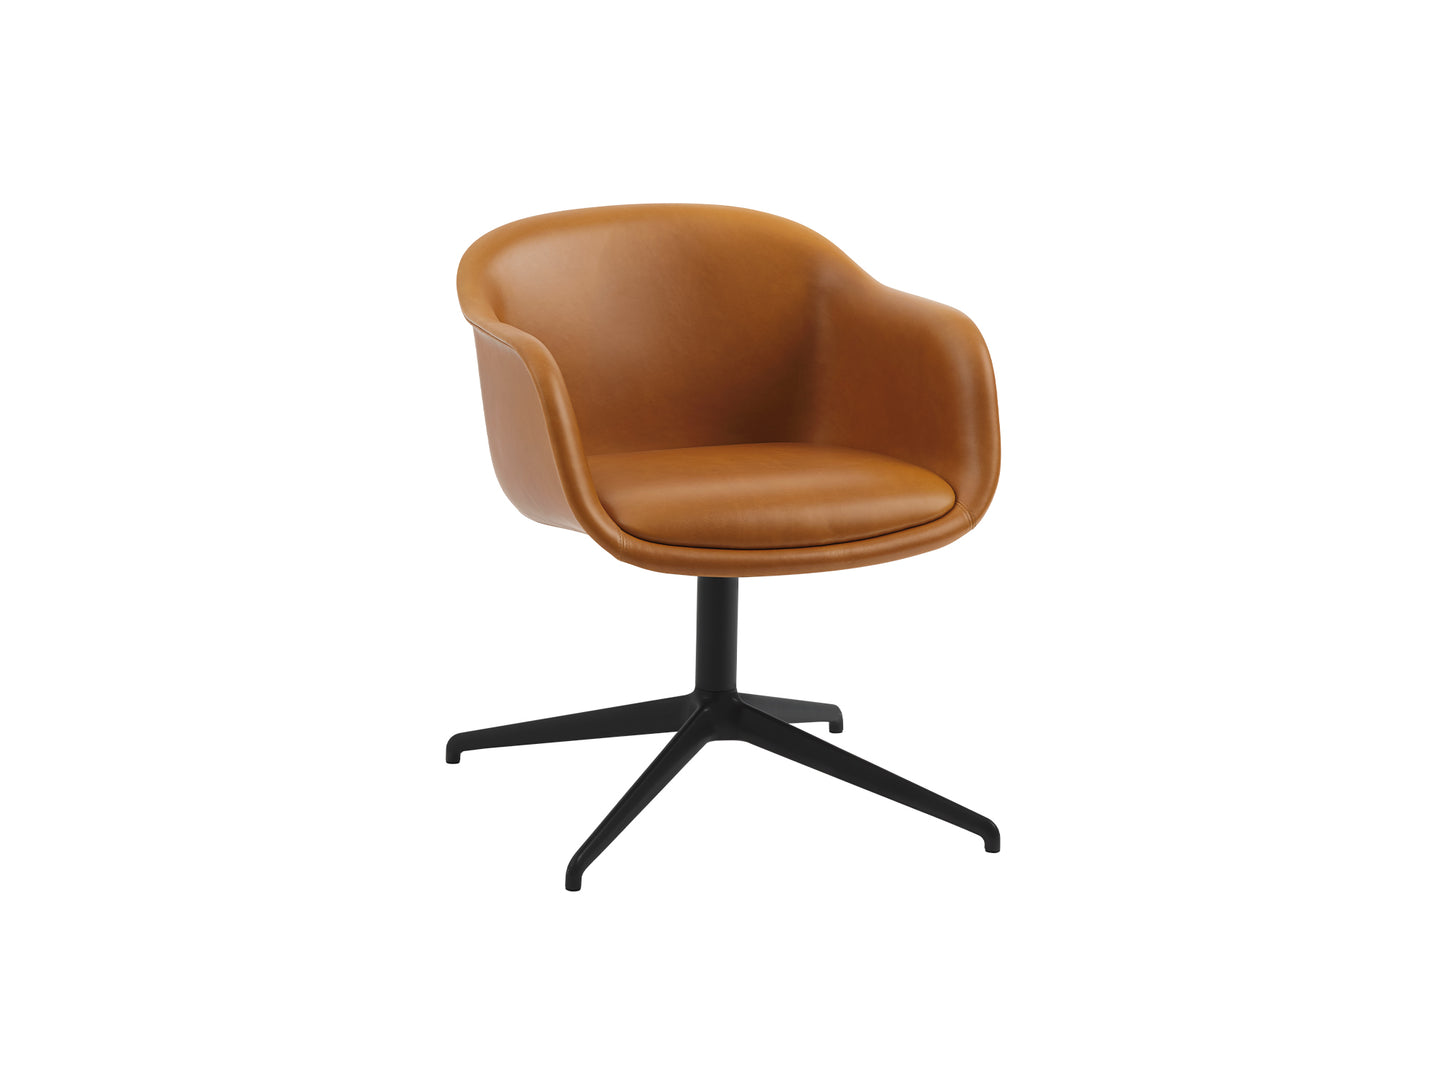 Fiber Conference Armchair with Swivel Base without Return by Muuto - cognac refine leather